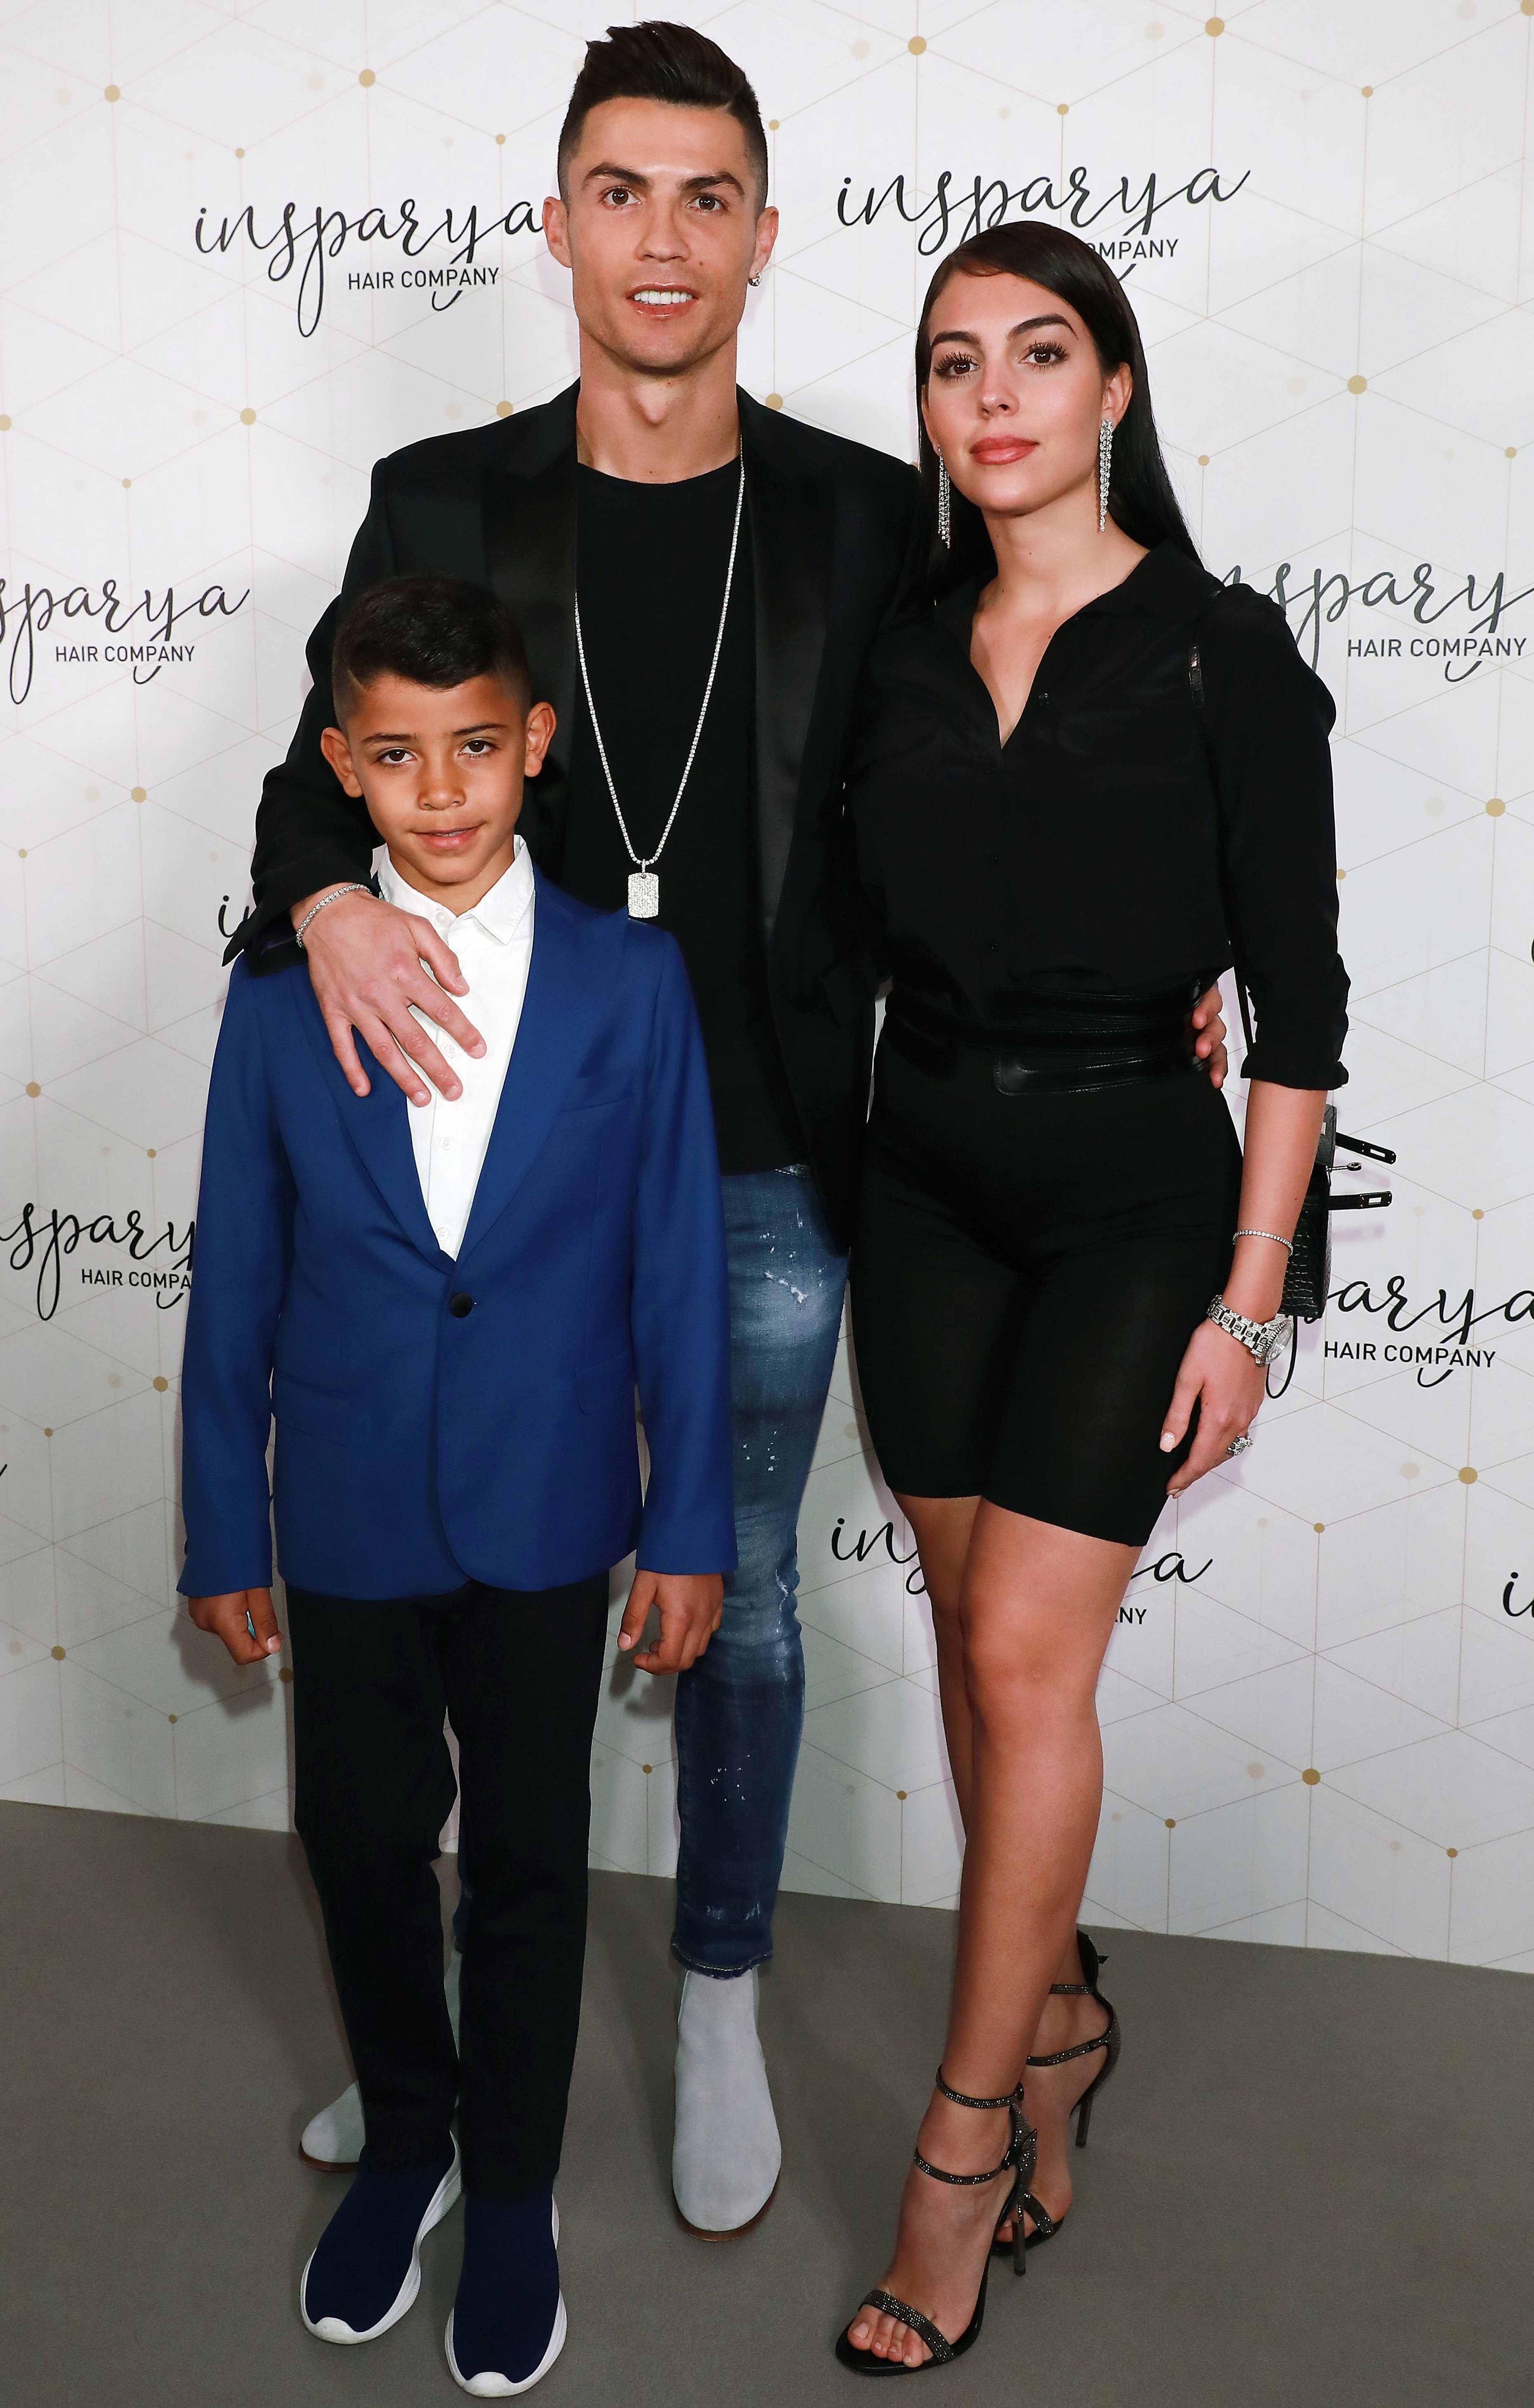 Georgina Rodriguez says it was 'love at first sight' as she